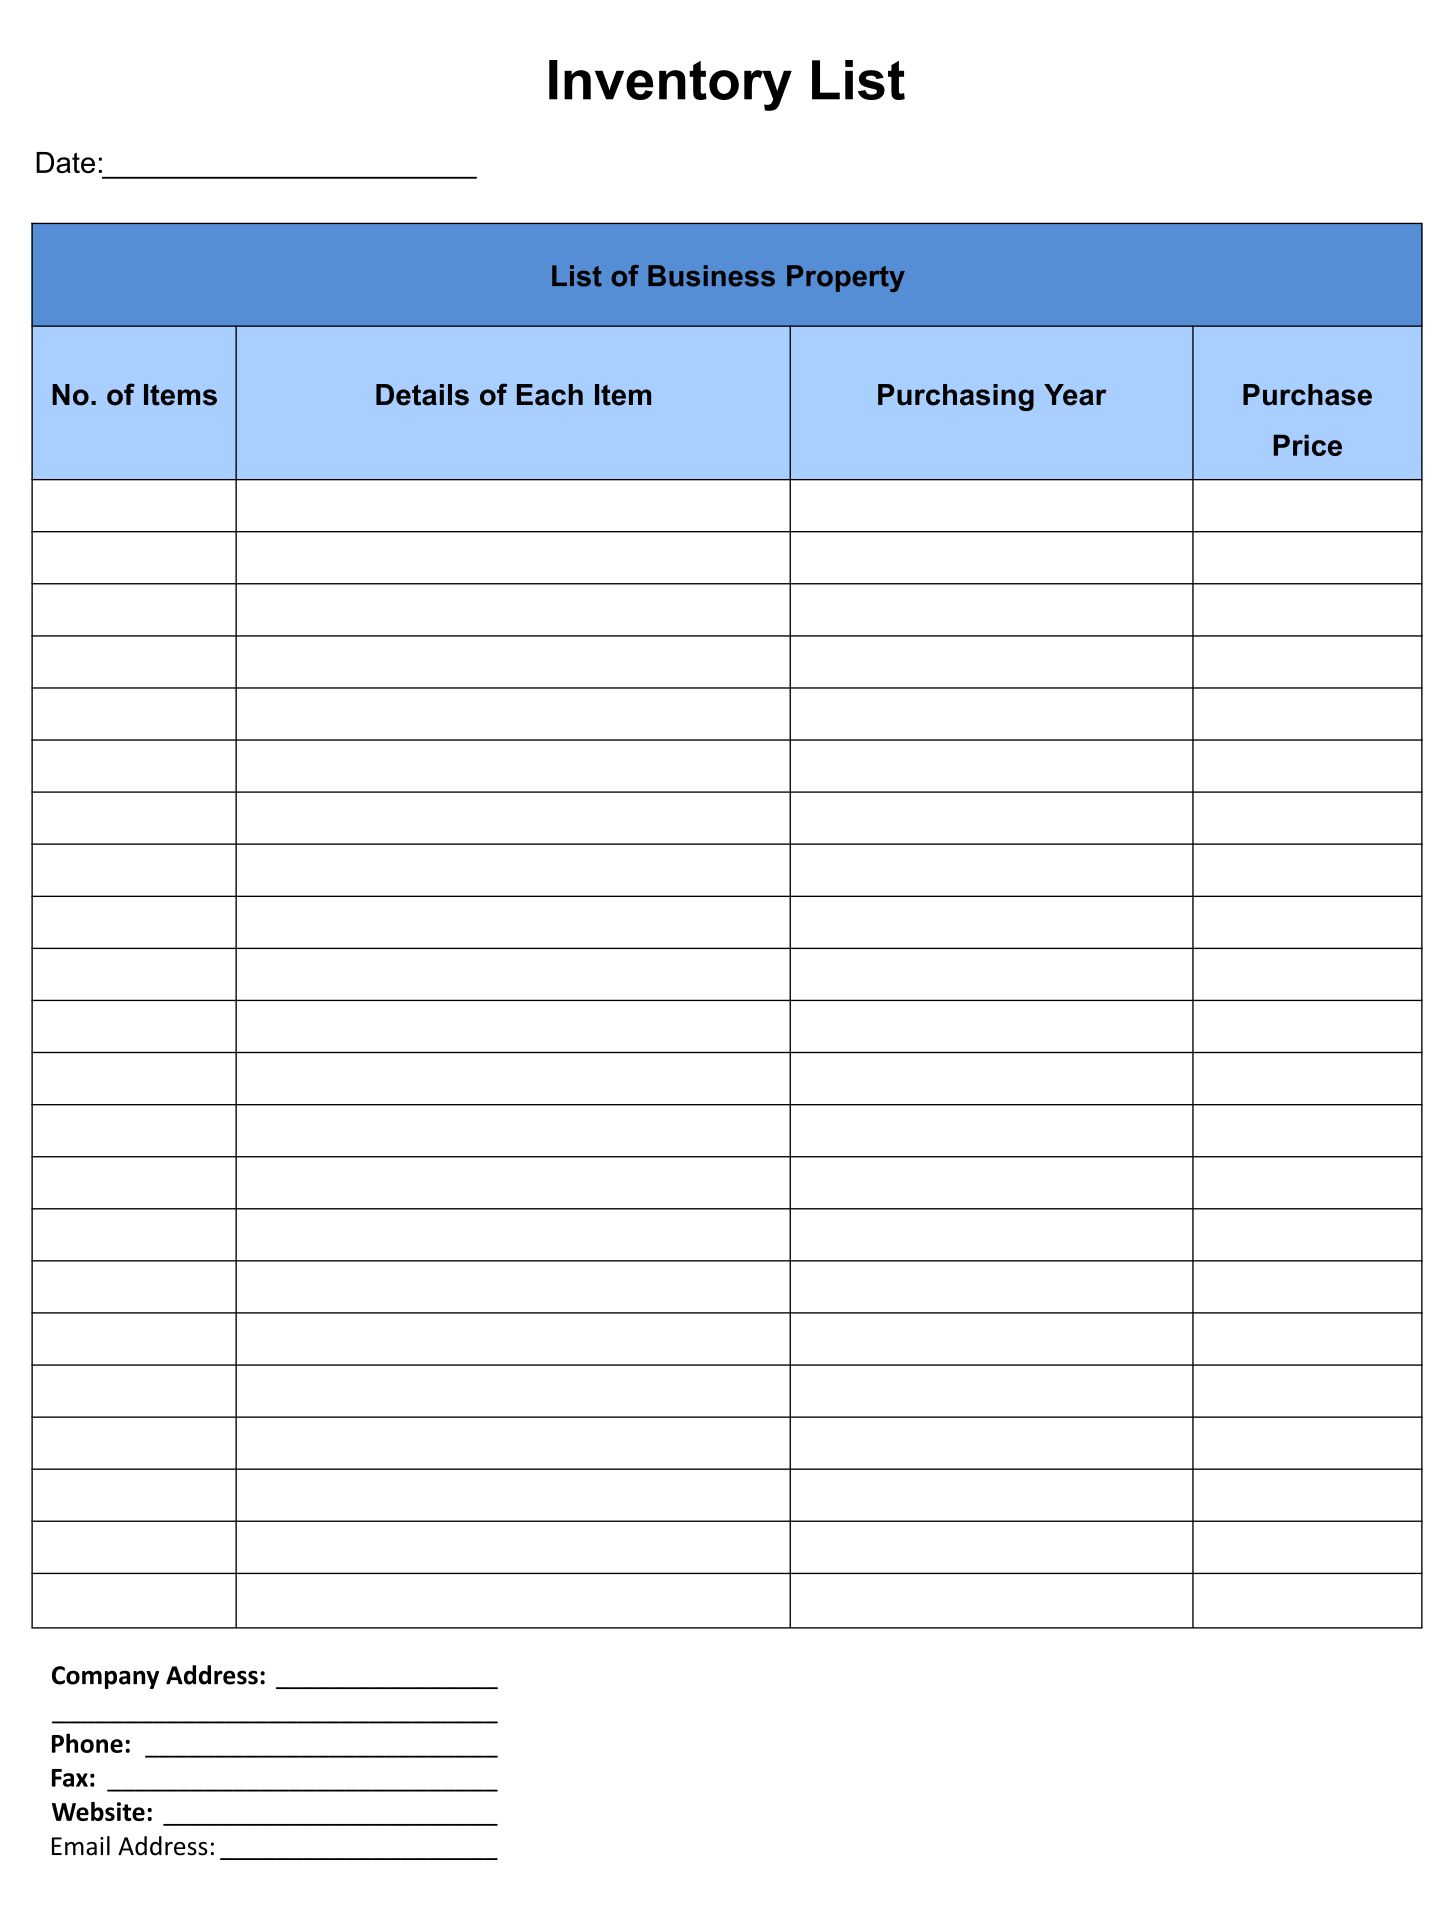 inventory-sheet-blank-excel-pictures-askxz